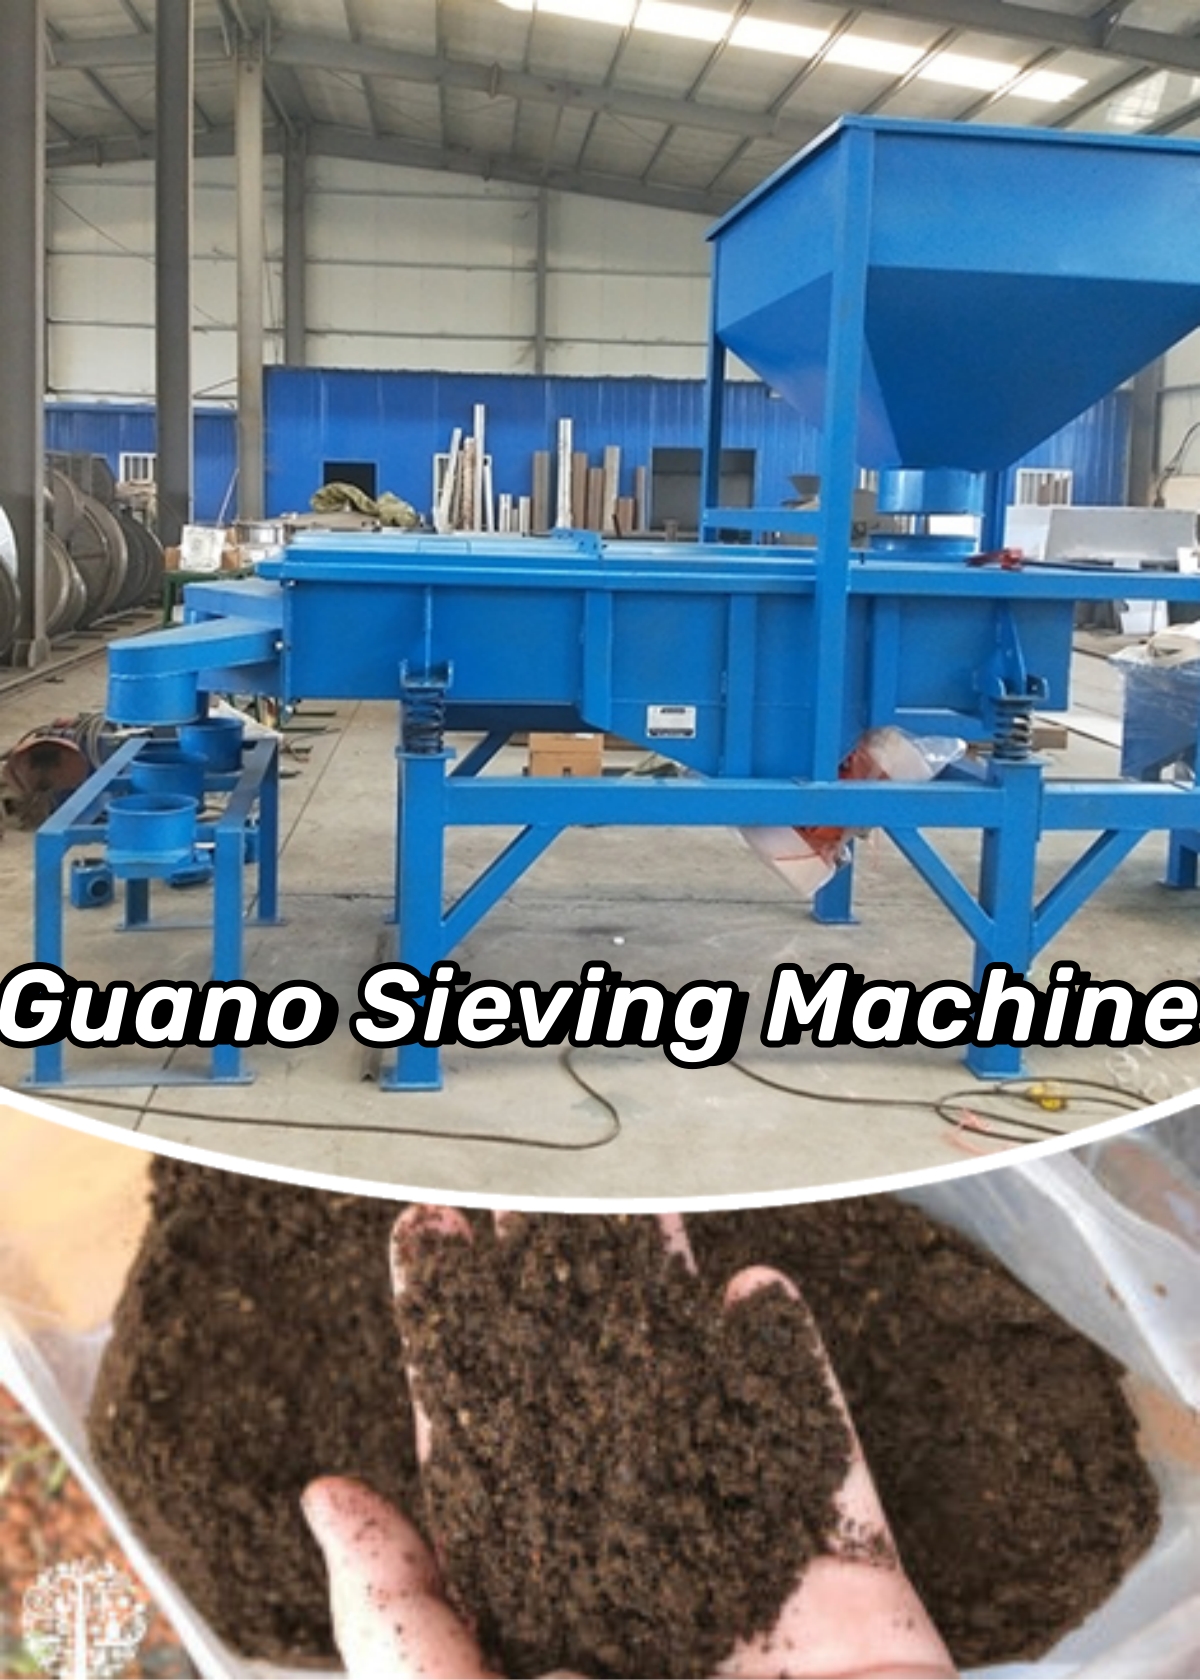 What Is A Guano Sieving Machine?